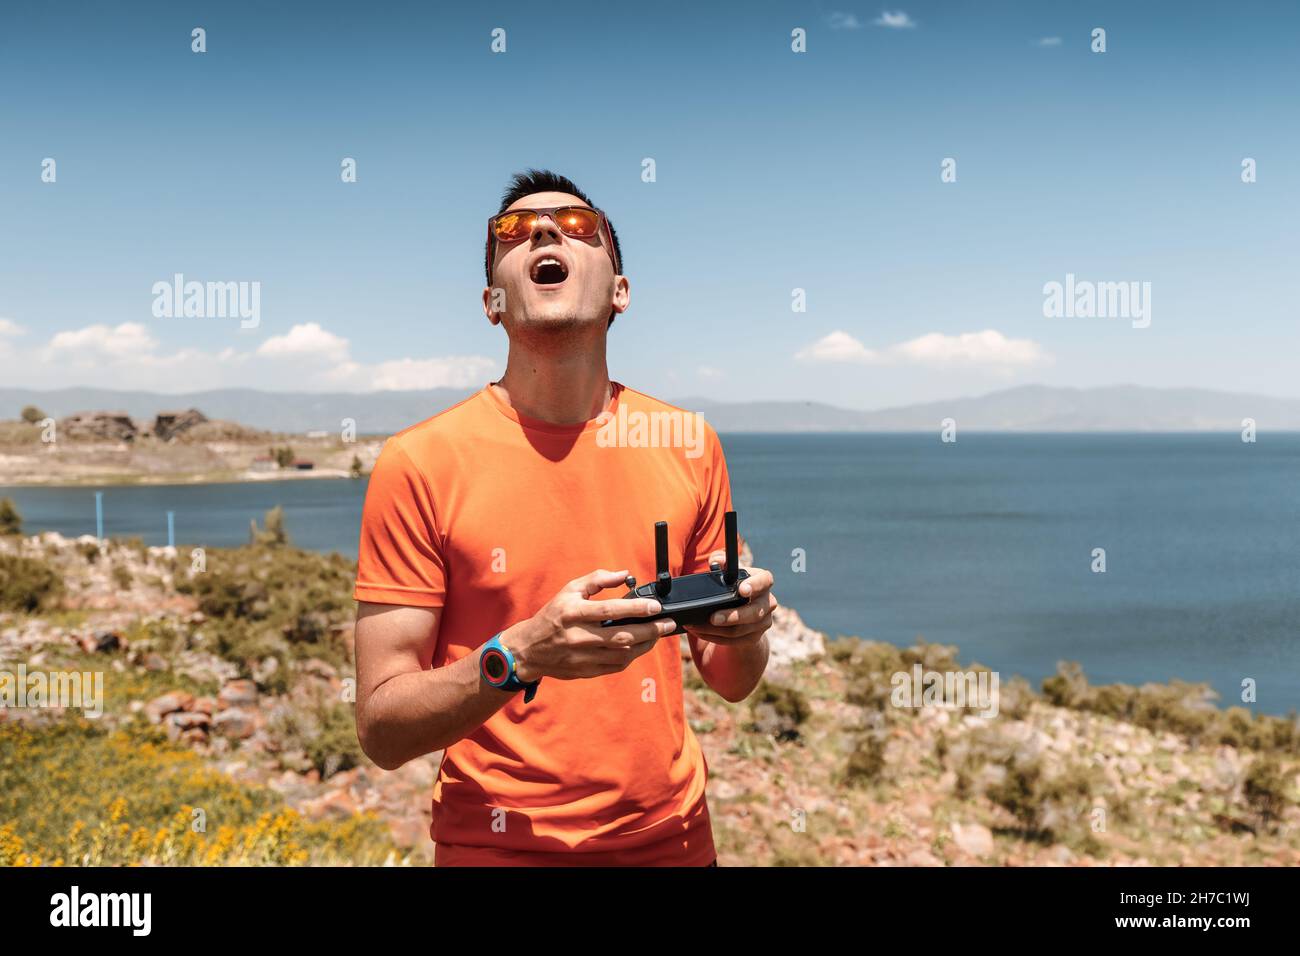 Man photographer or videographer as a pilot of uav. Flight of a quadcopter or drone using a wireless remote control over a radio channel Stock Photo